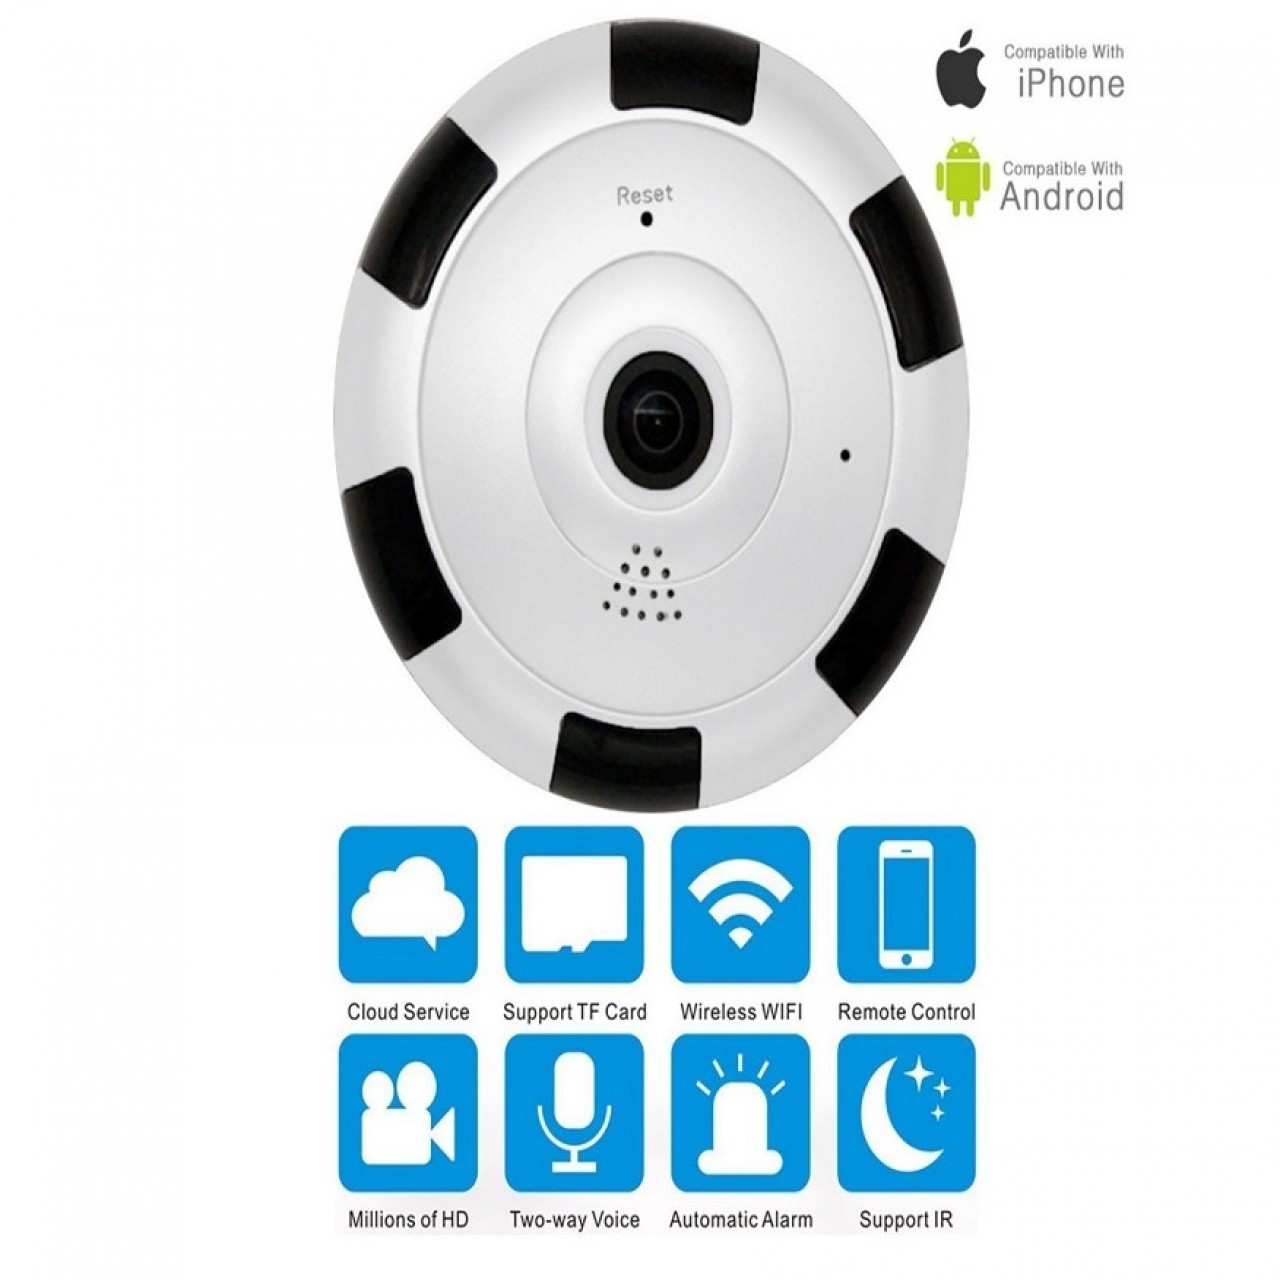 V380 - Home Security Ceiling Fish Eye Wireless IP Camera - Black &White